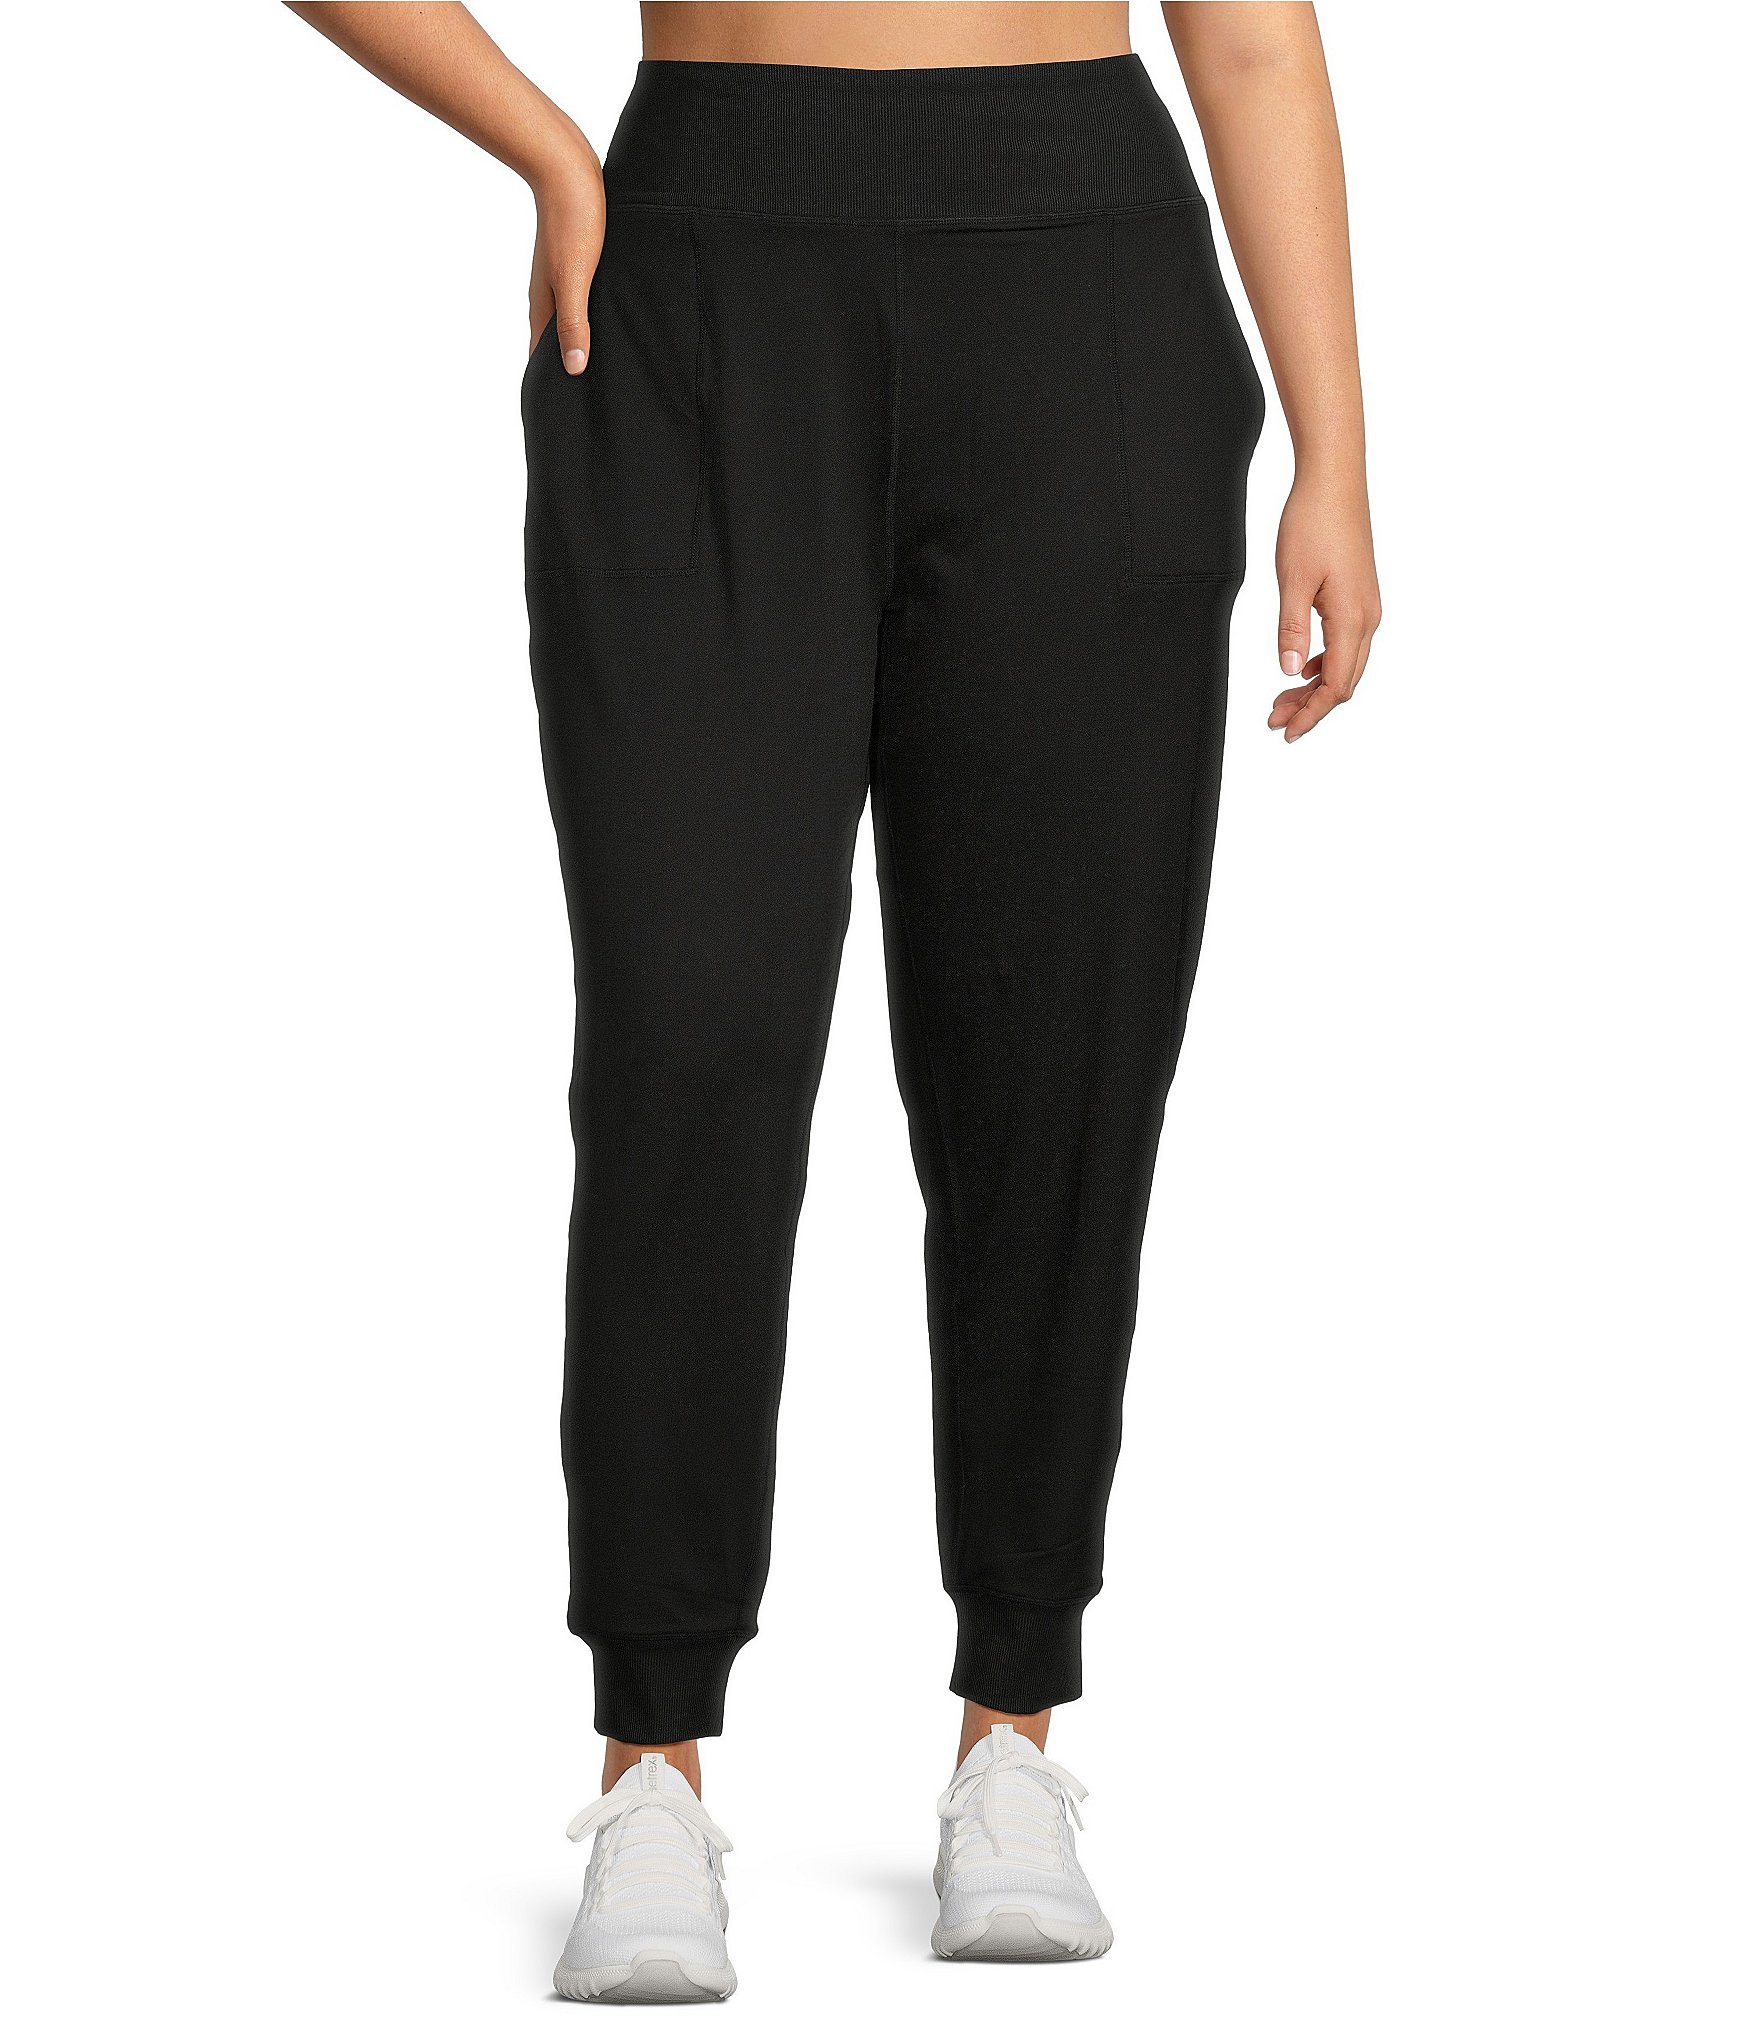 Jogger Plus Size Pants for Women's 3X Size for sale